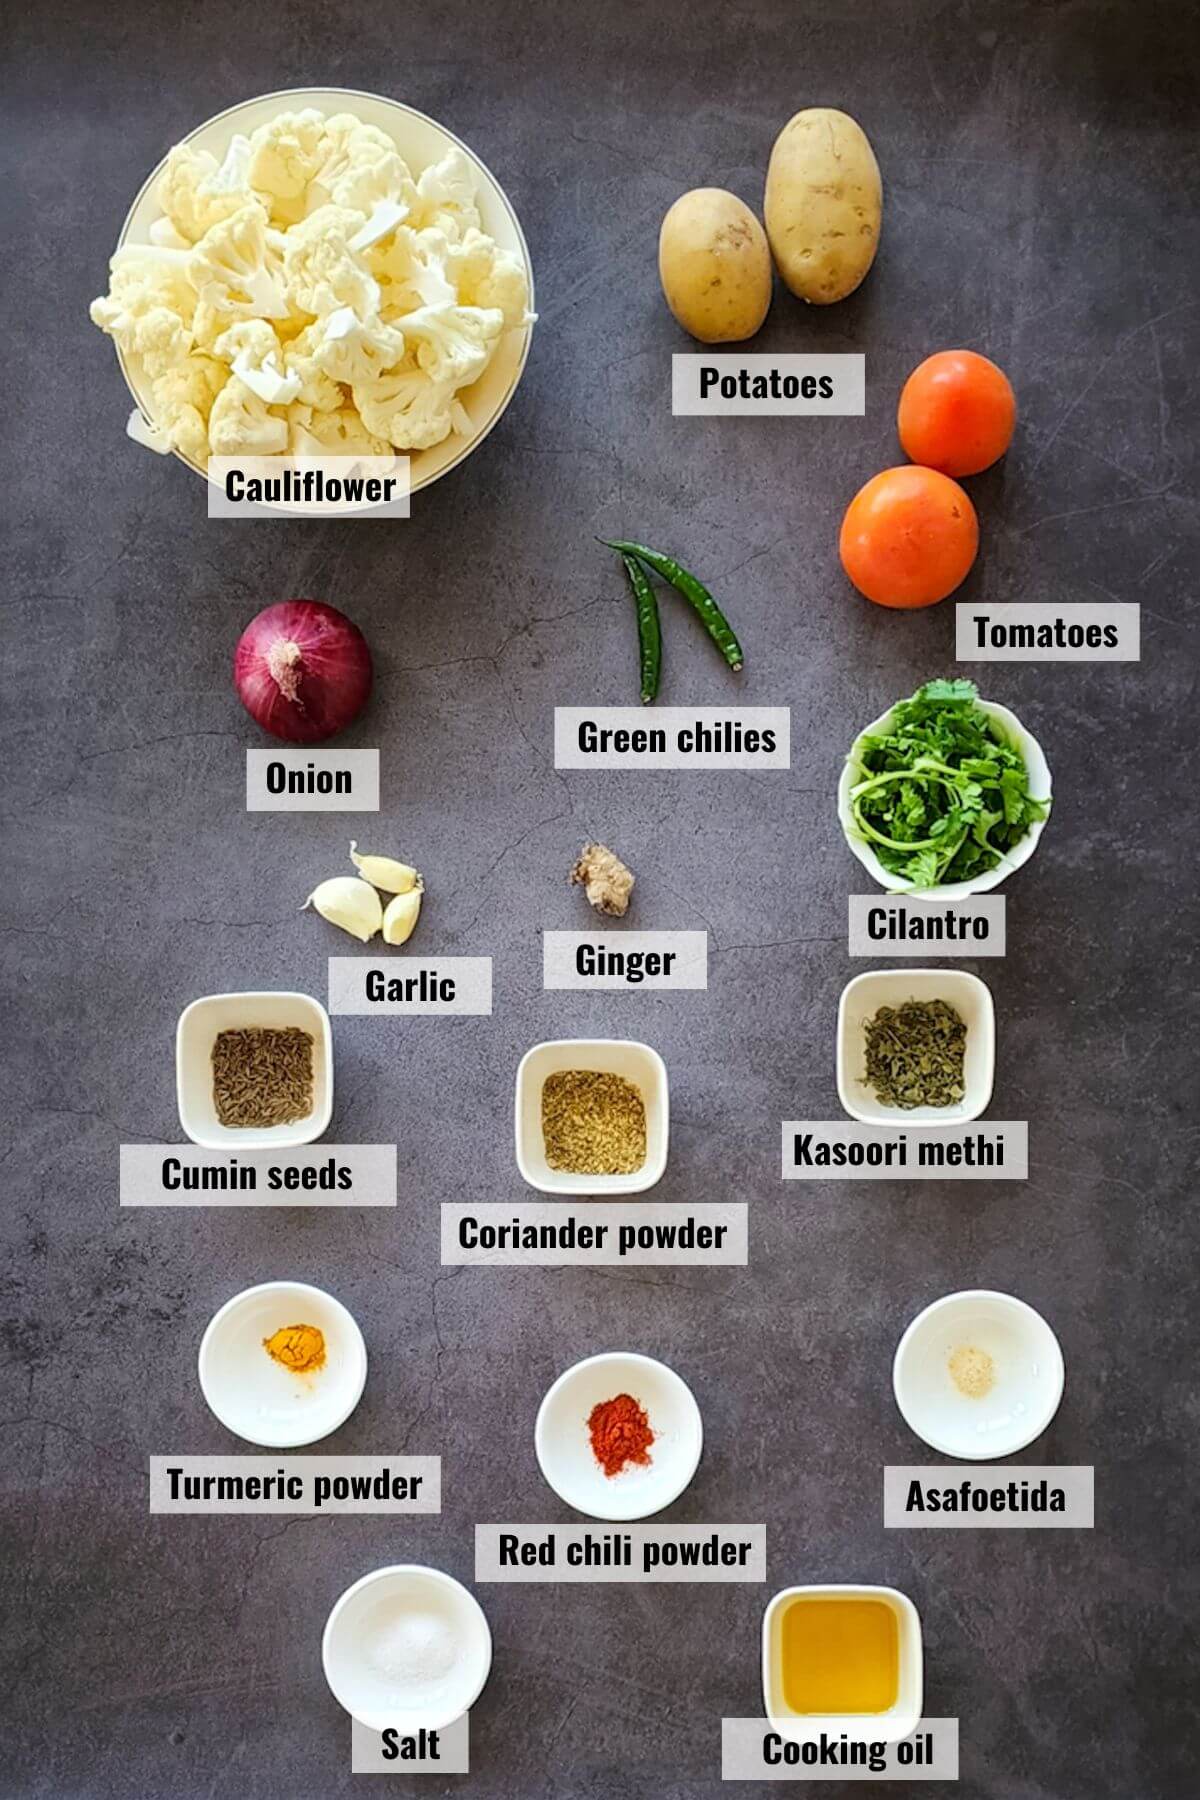 Ingredients required to make Indian style cauliflower and potatoes.